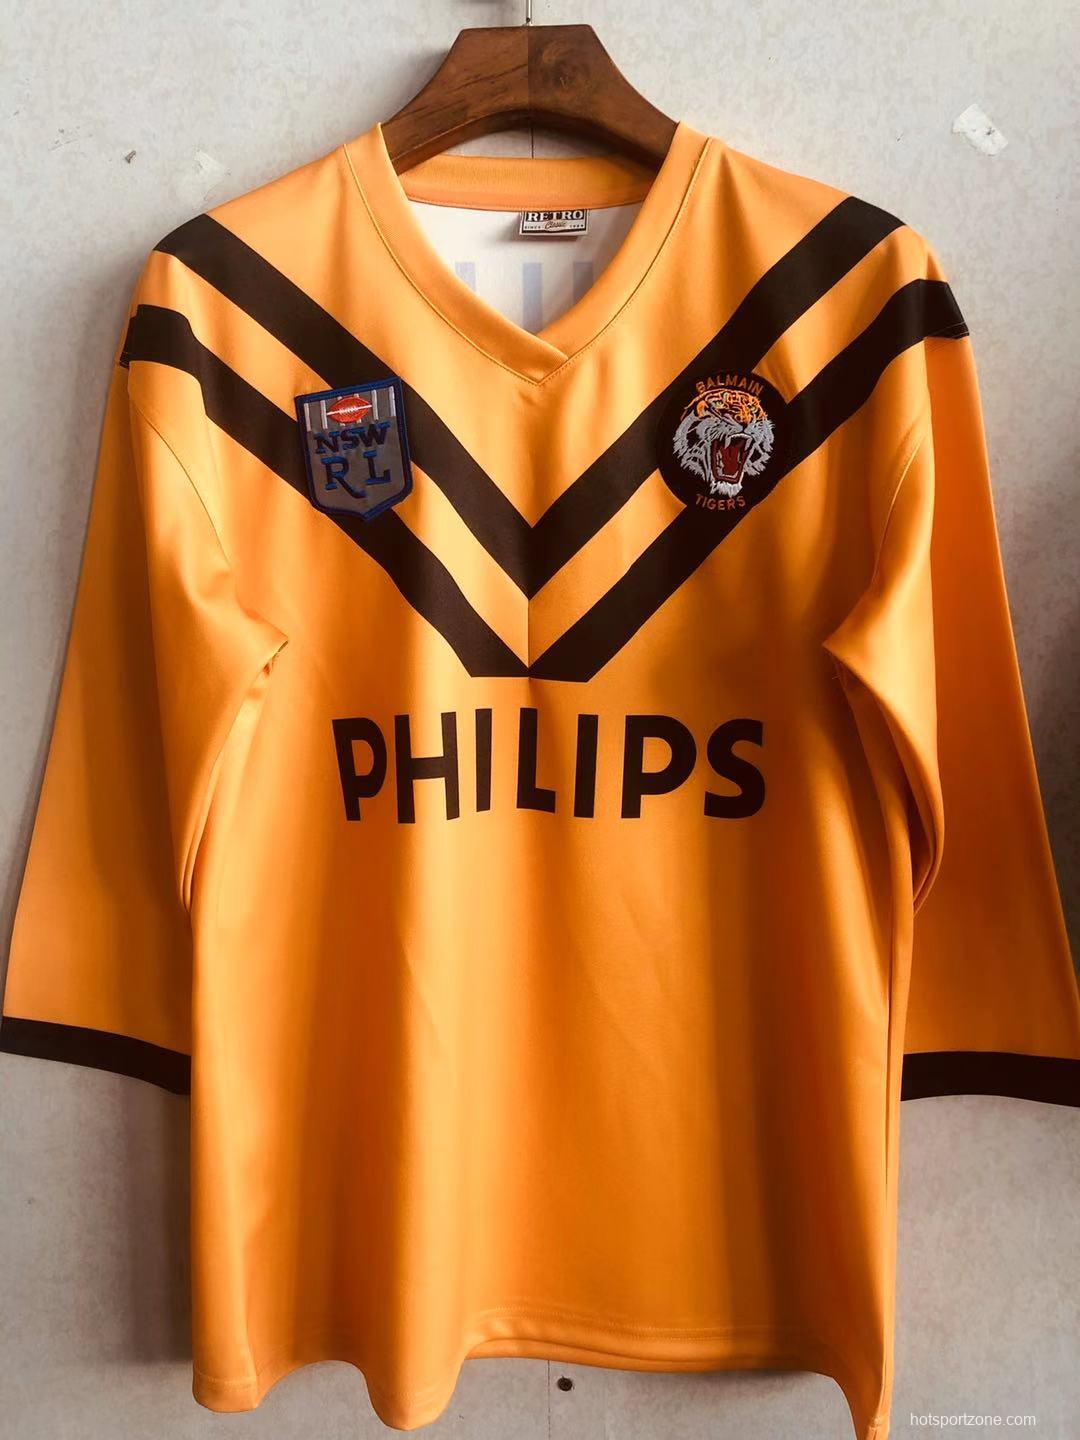 Balmain Tigers 1989 Adult Retro Rugby Jersey